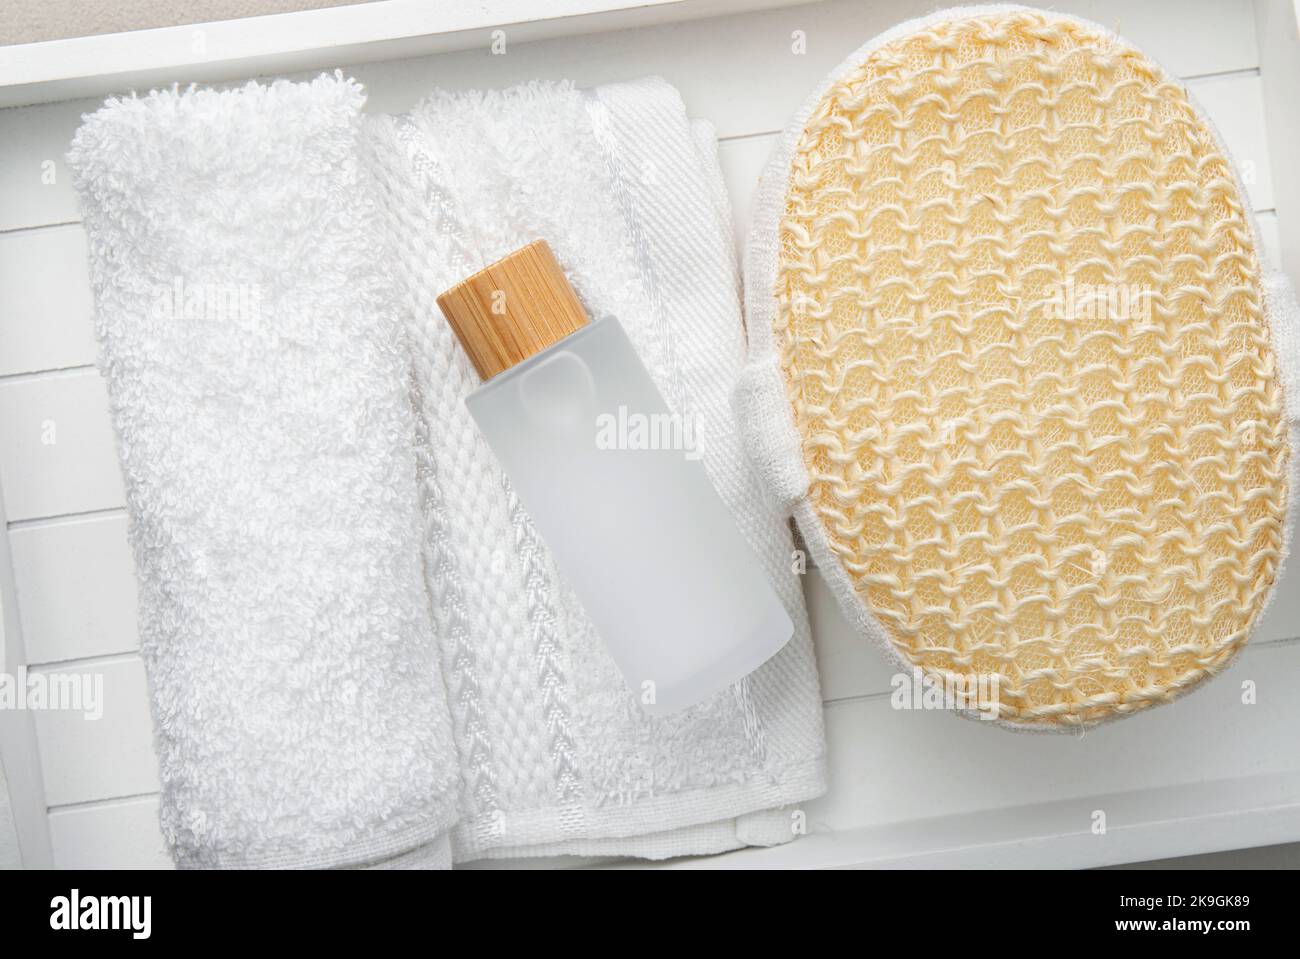 Concept of intimate wash gel for daily hygiene of the delicate intimate area. Matte soap bottle with gel on rolled white towel and bath sponge at home. Stock Photo